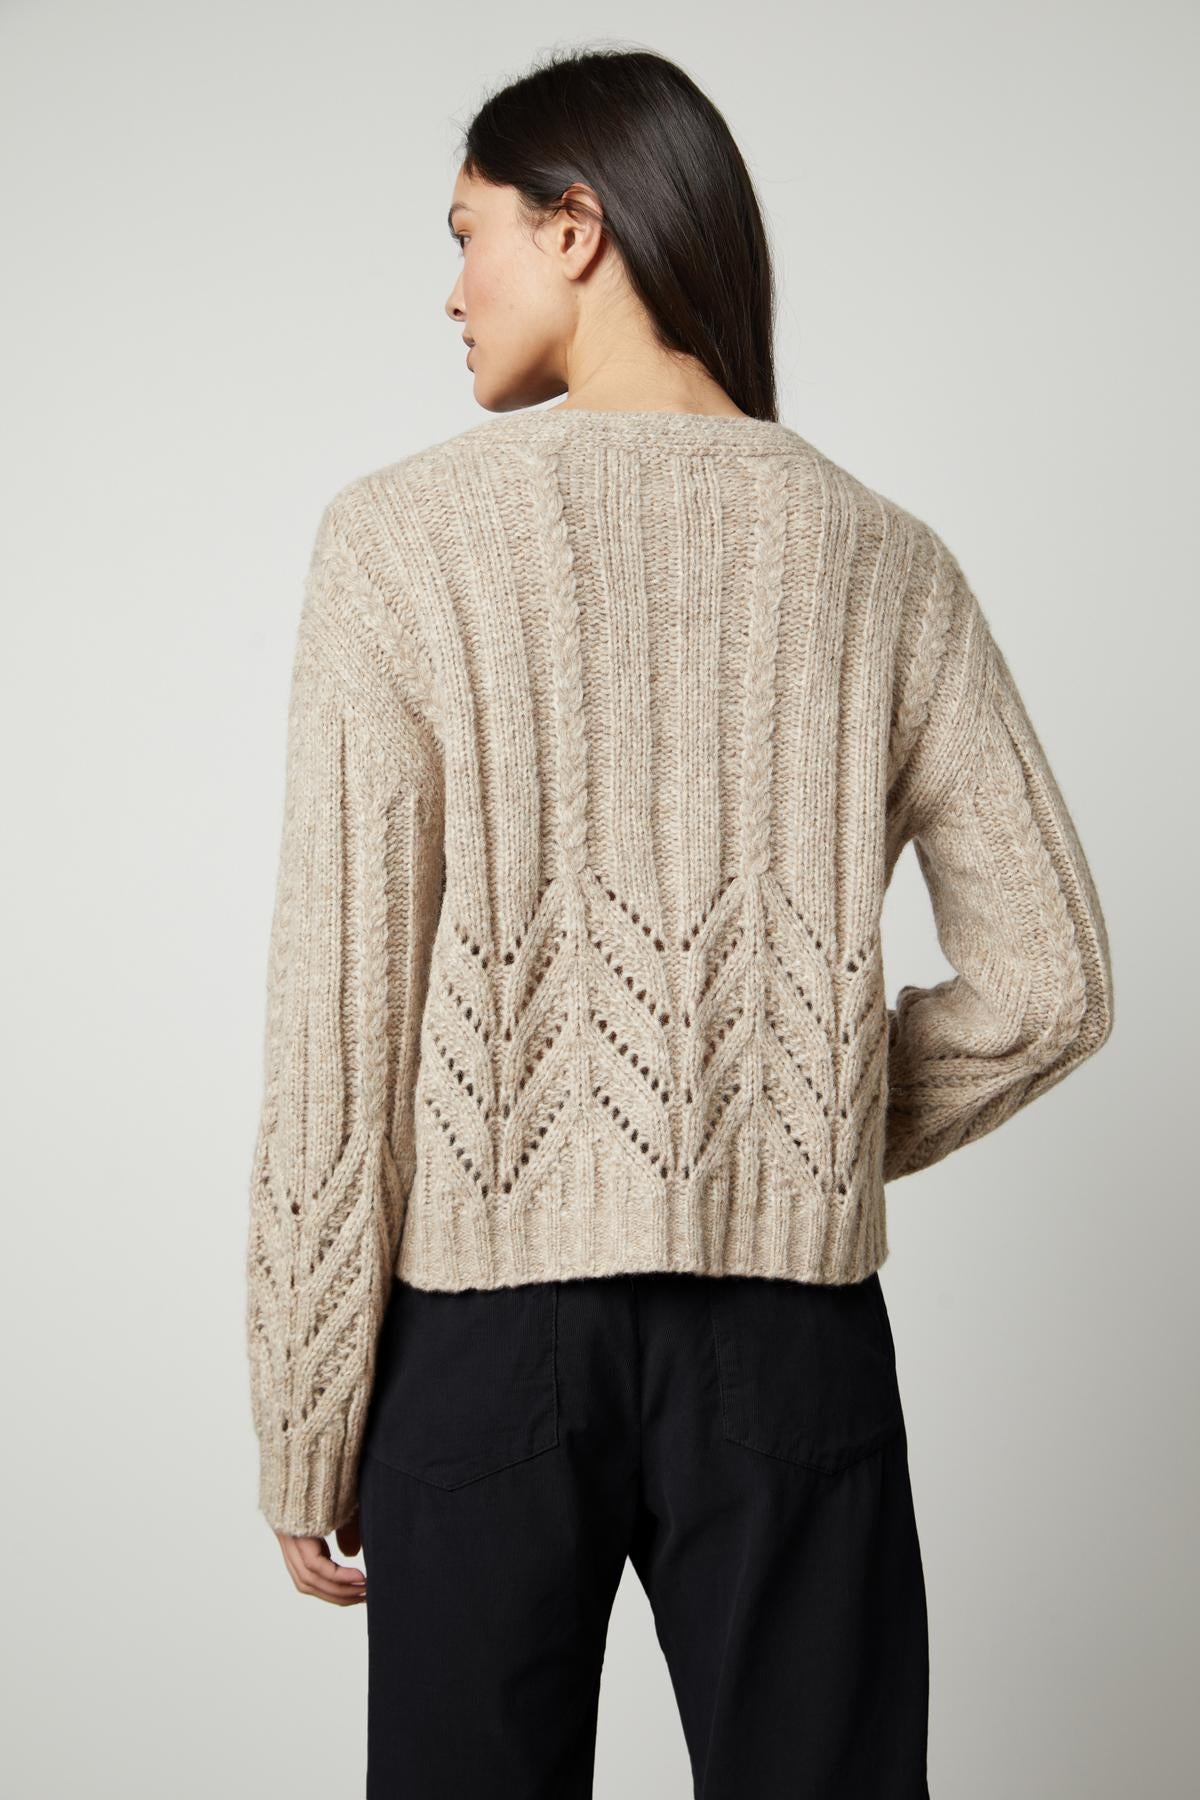   The back view of a woman wearing a Velvet by Graham & Spencer HAZEL ALPACA CABLE KNIT CARDIGAN sweater. 